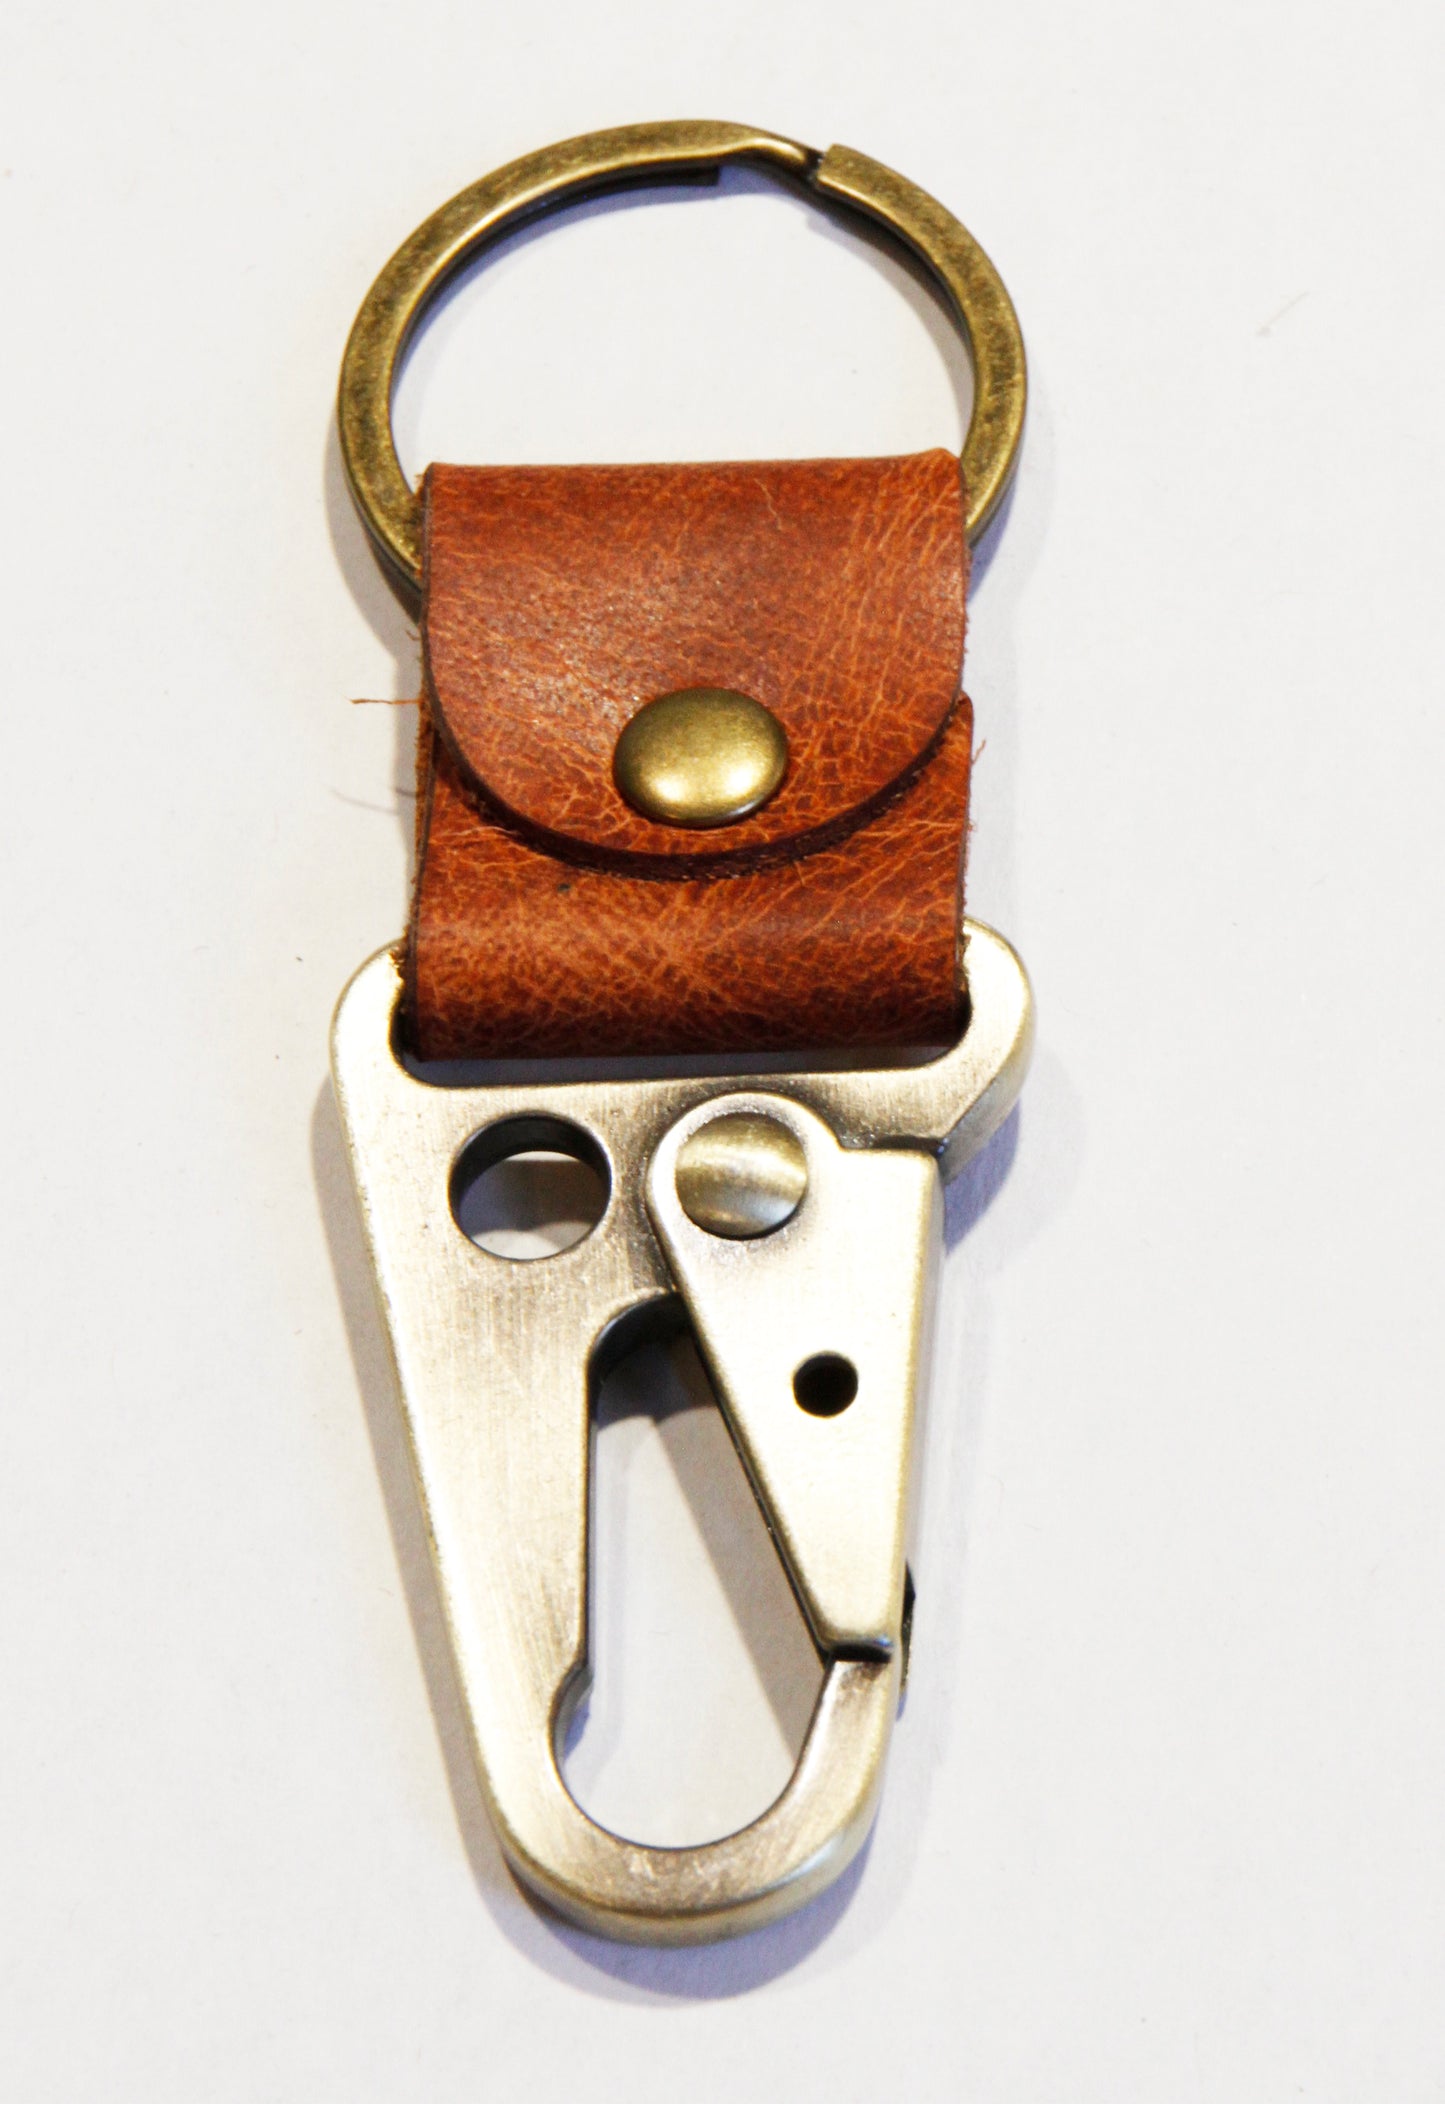 Leather Key Chain with a Bronze colored Rifle Sling Clip and a Bronze Colored Key Ring